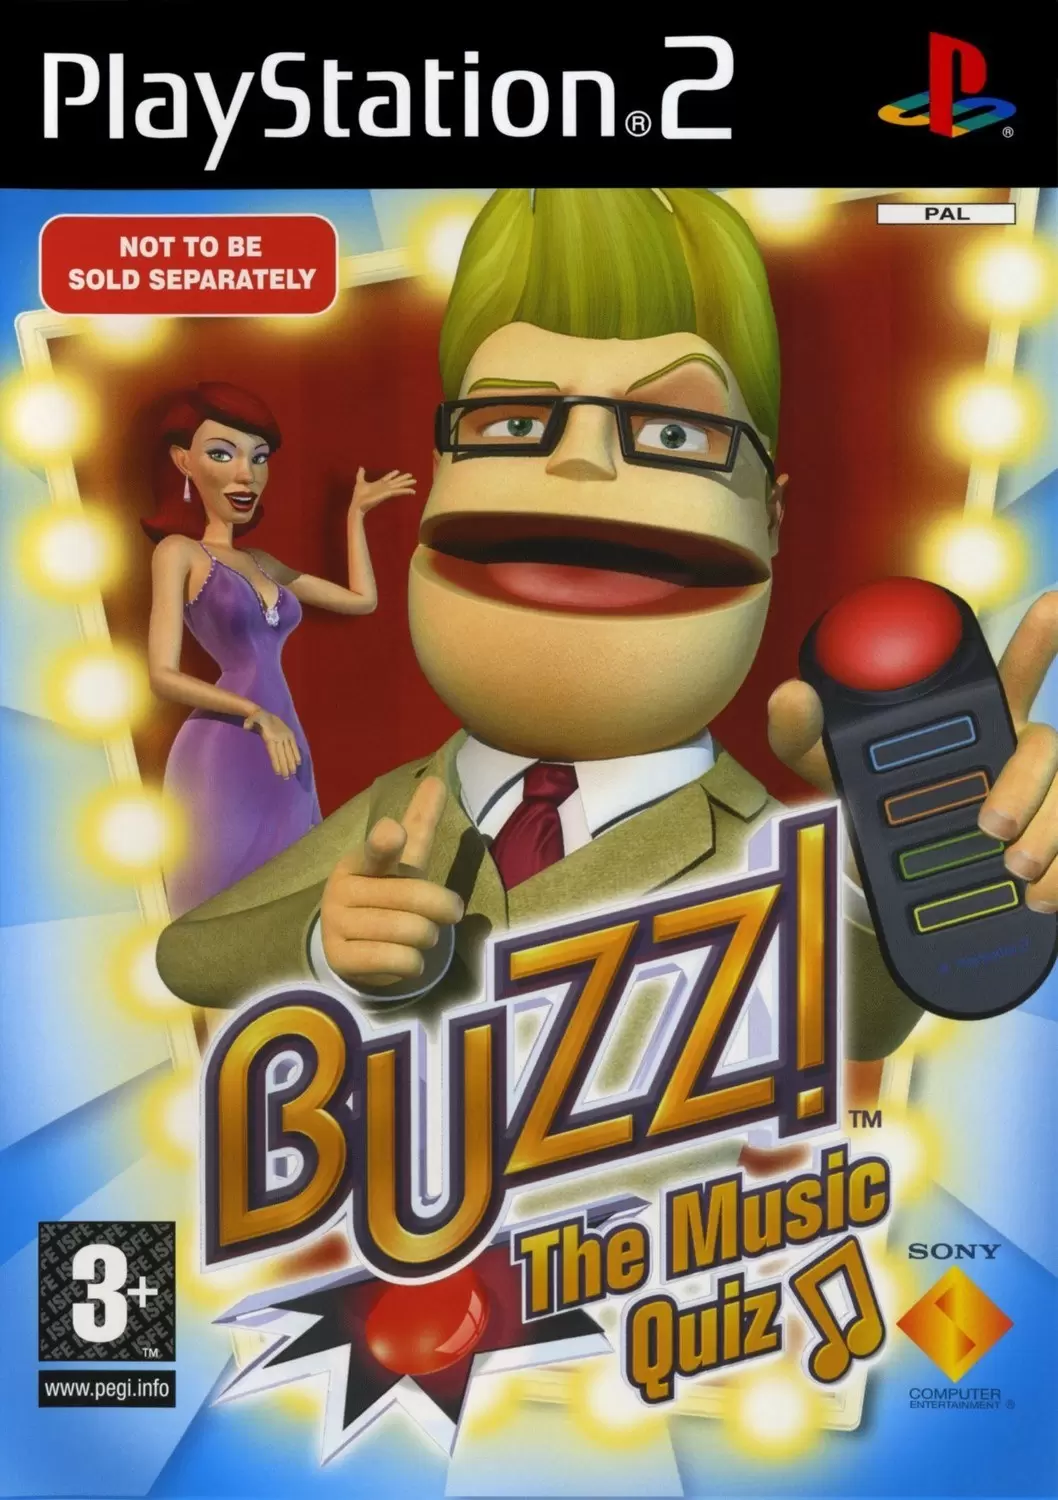 PS2 Games - Buzz! The Music Quiz